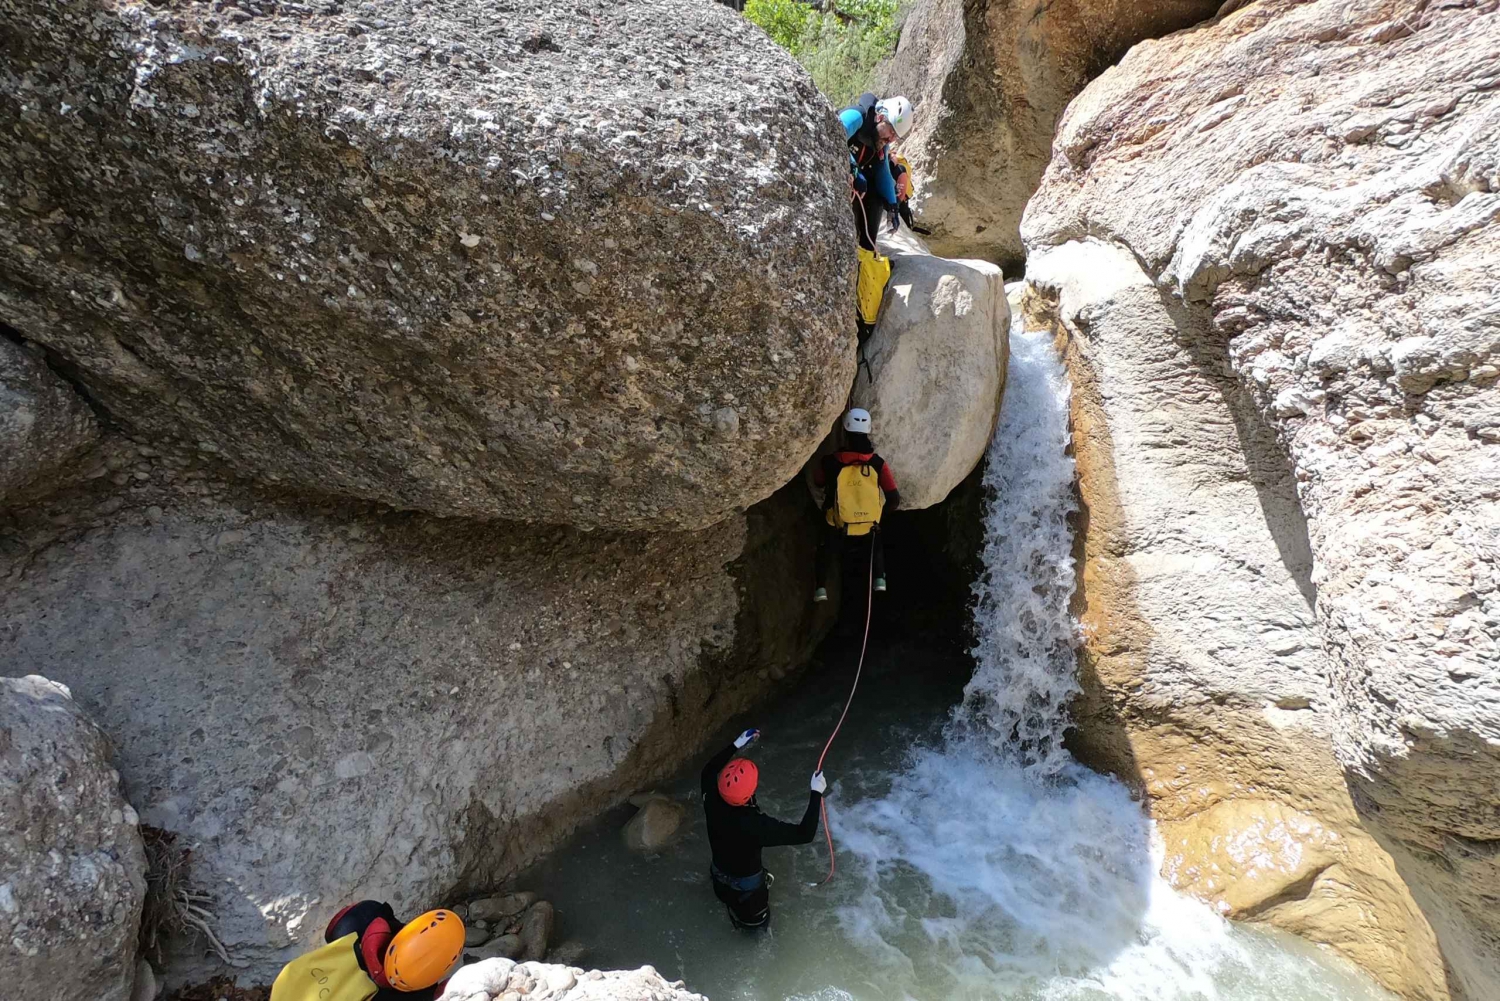 From Athens: Agios Loukas Gorge Canyoning Experience